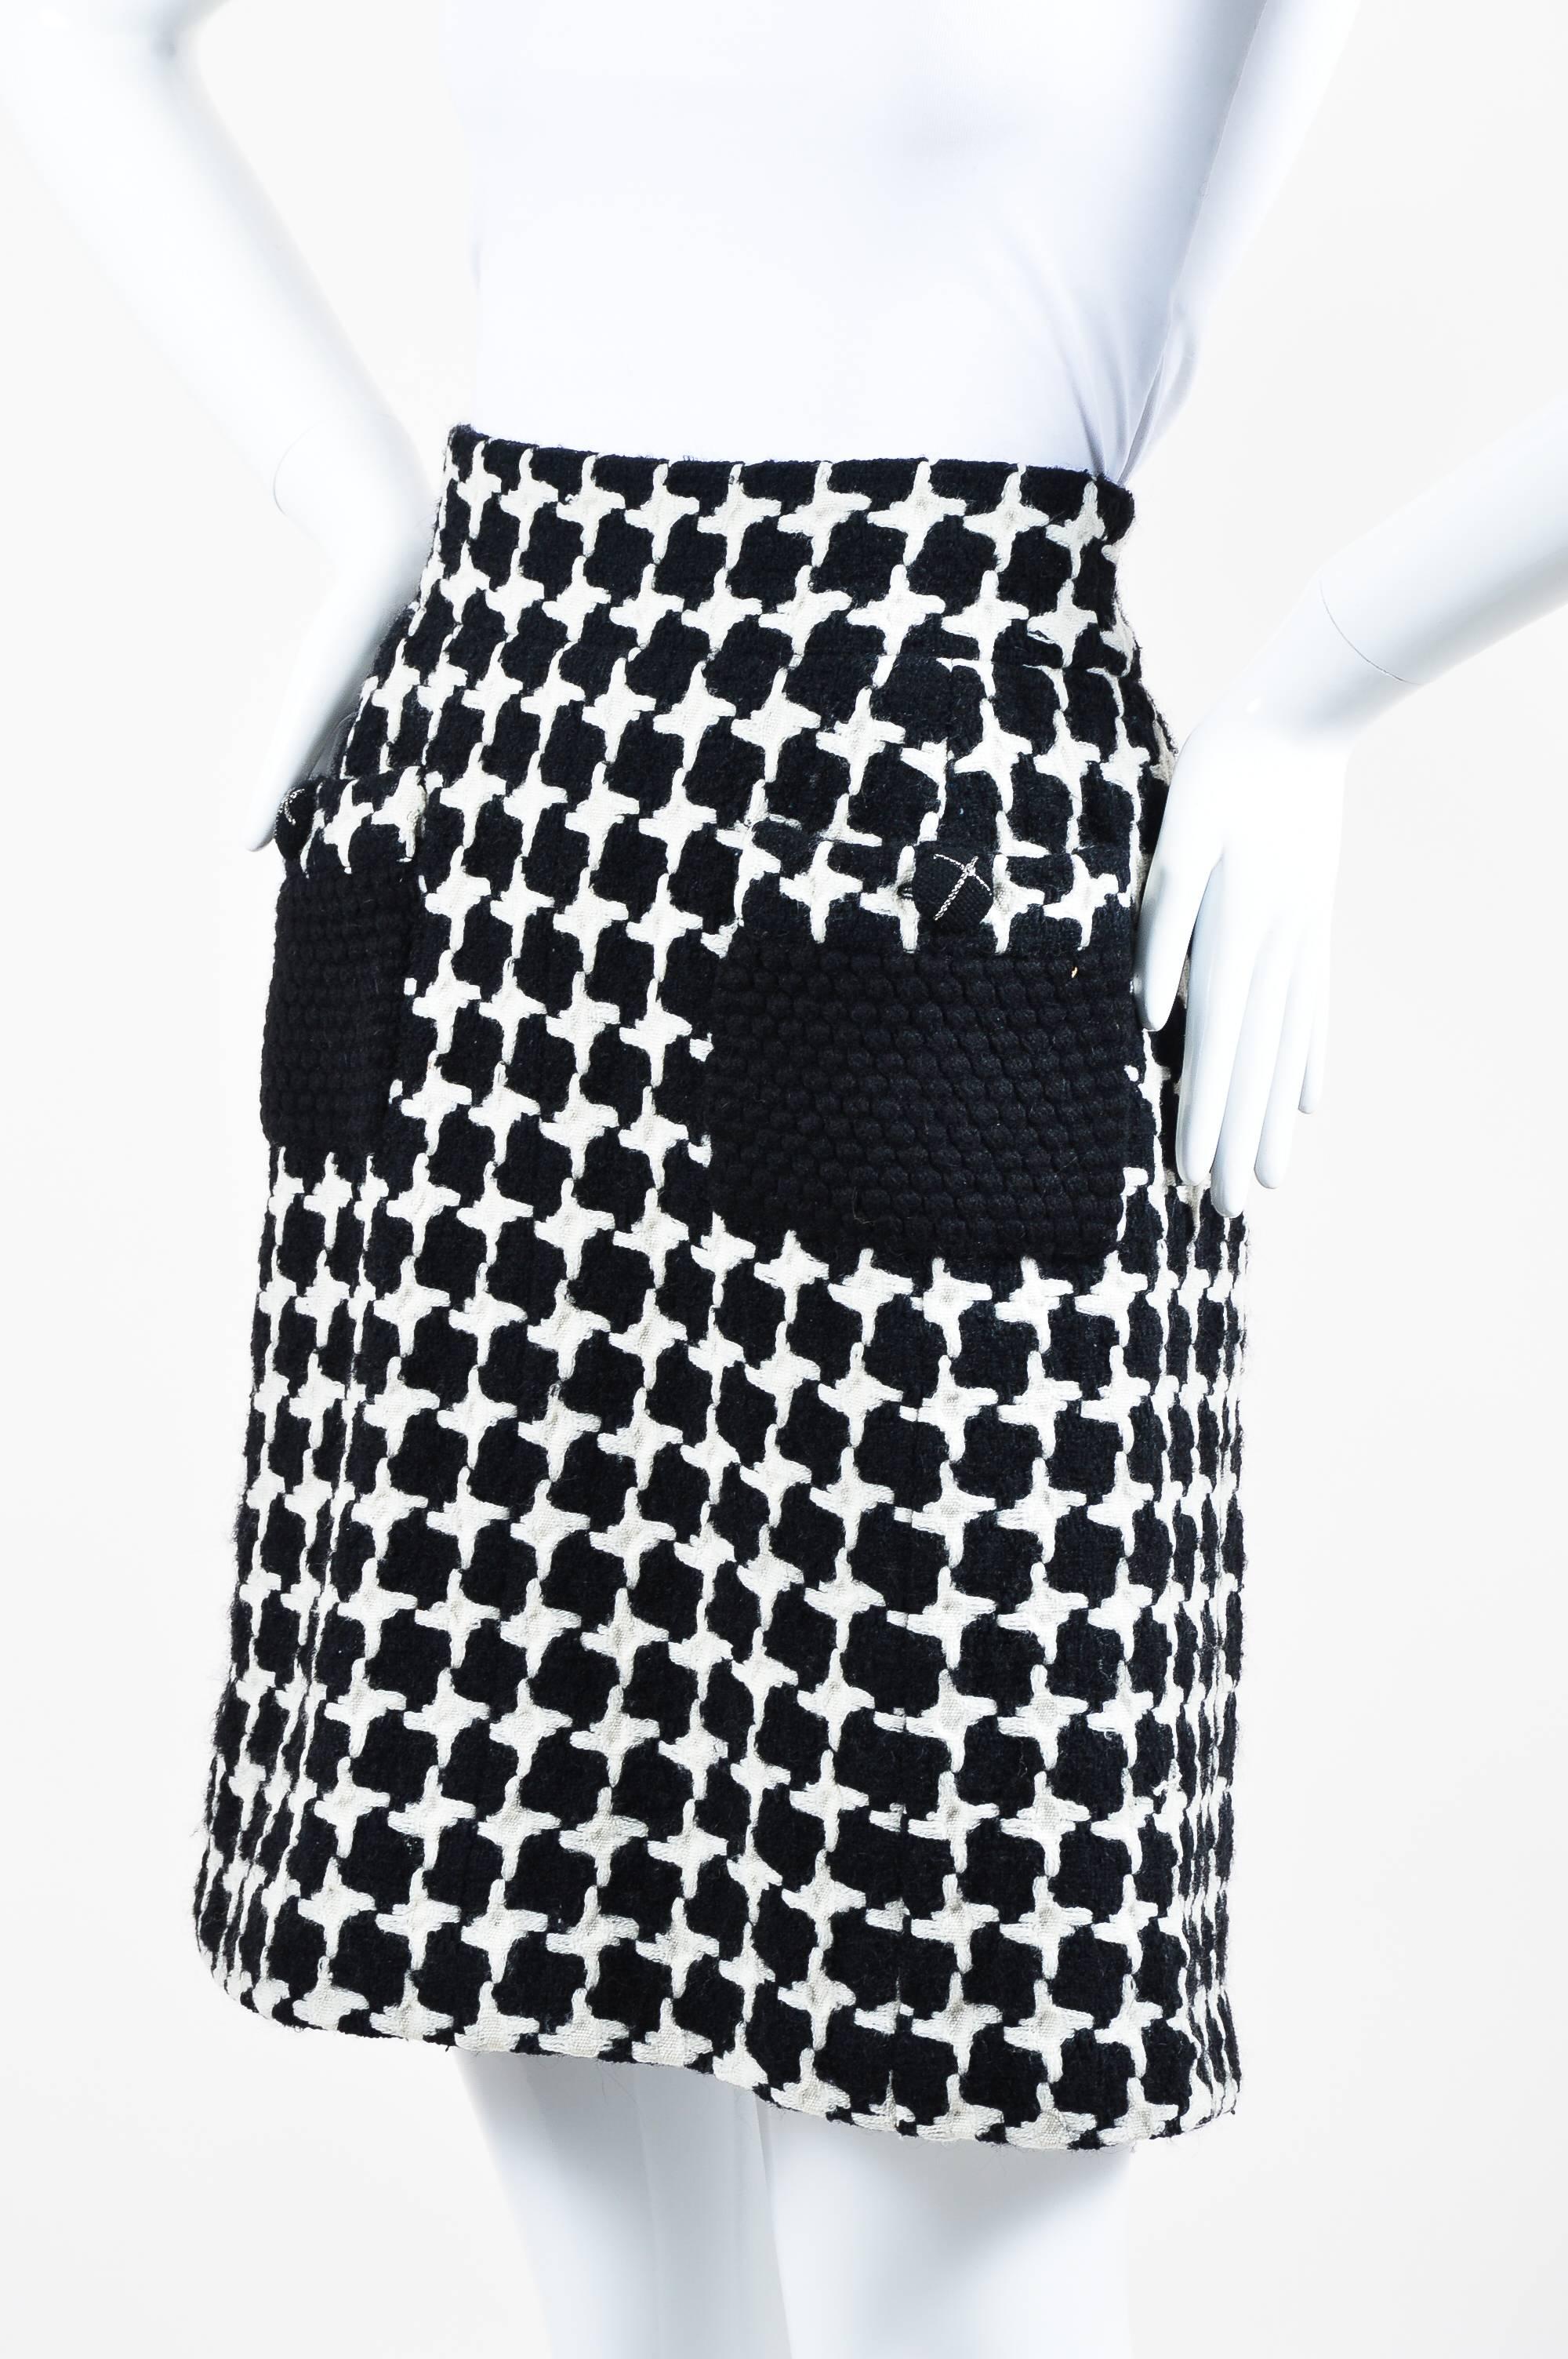 From Fall 2007, this vintage inspired skirt is constructed of a wool blend knit into oversized houndstooth designs. A-line silhouette. Two pockets on front have button closure; each button is detailed with chain trim and a tiny 'CC' logo. Matching